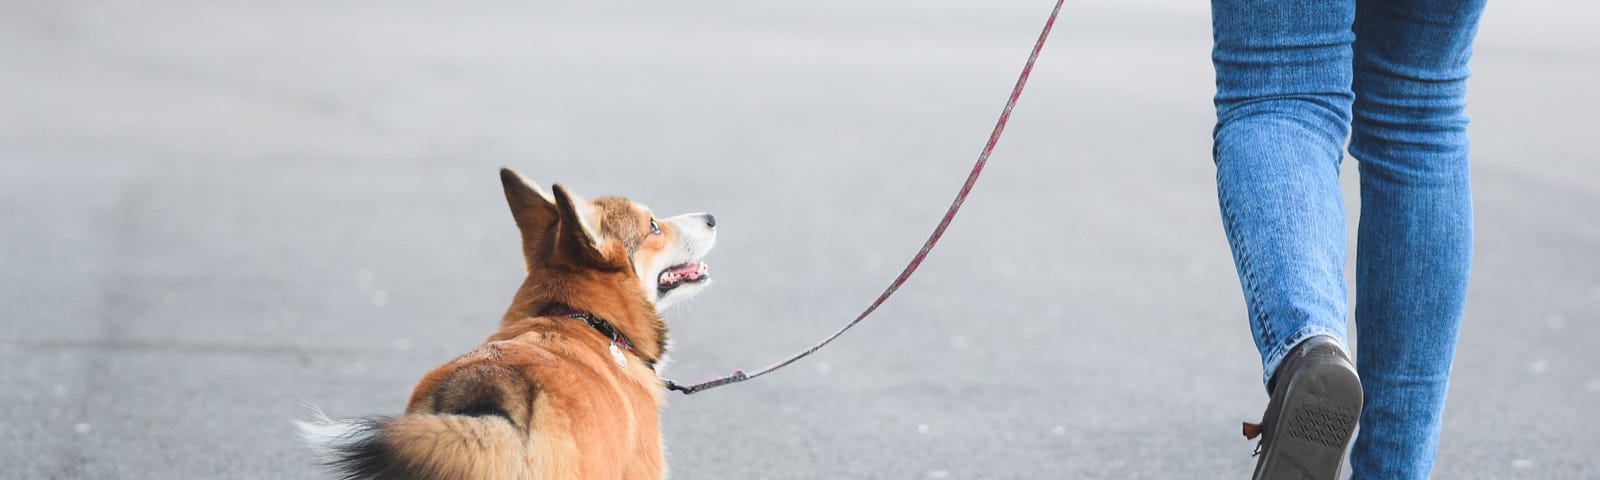 a corgi dog being walked on leash by a woman in jeans visible from the waist down